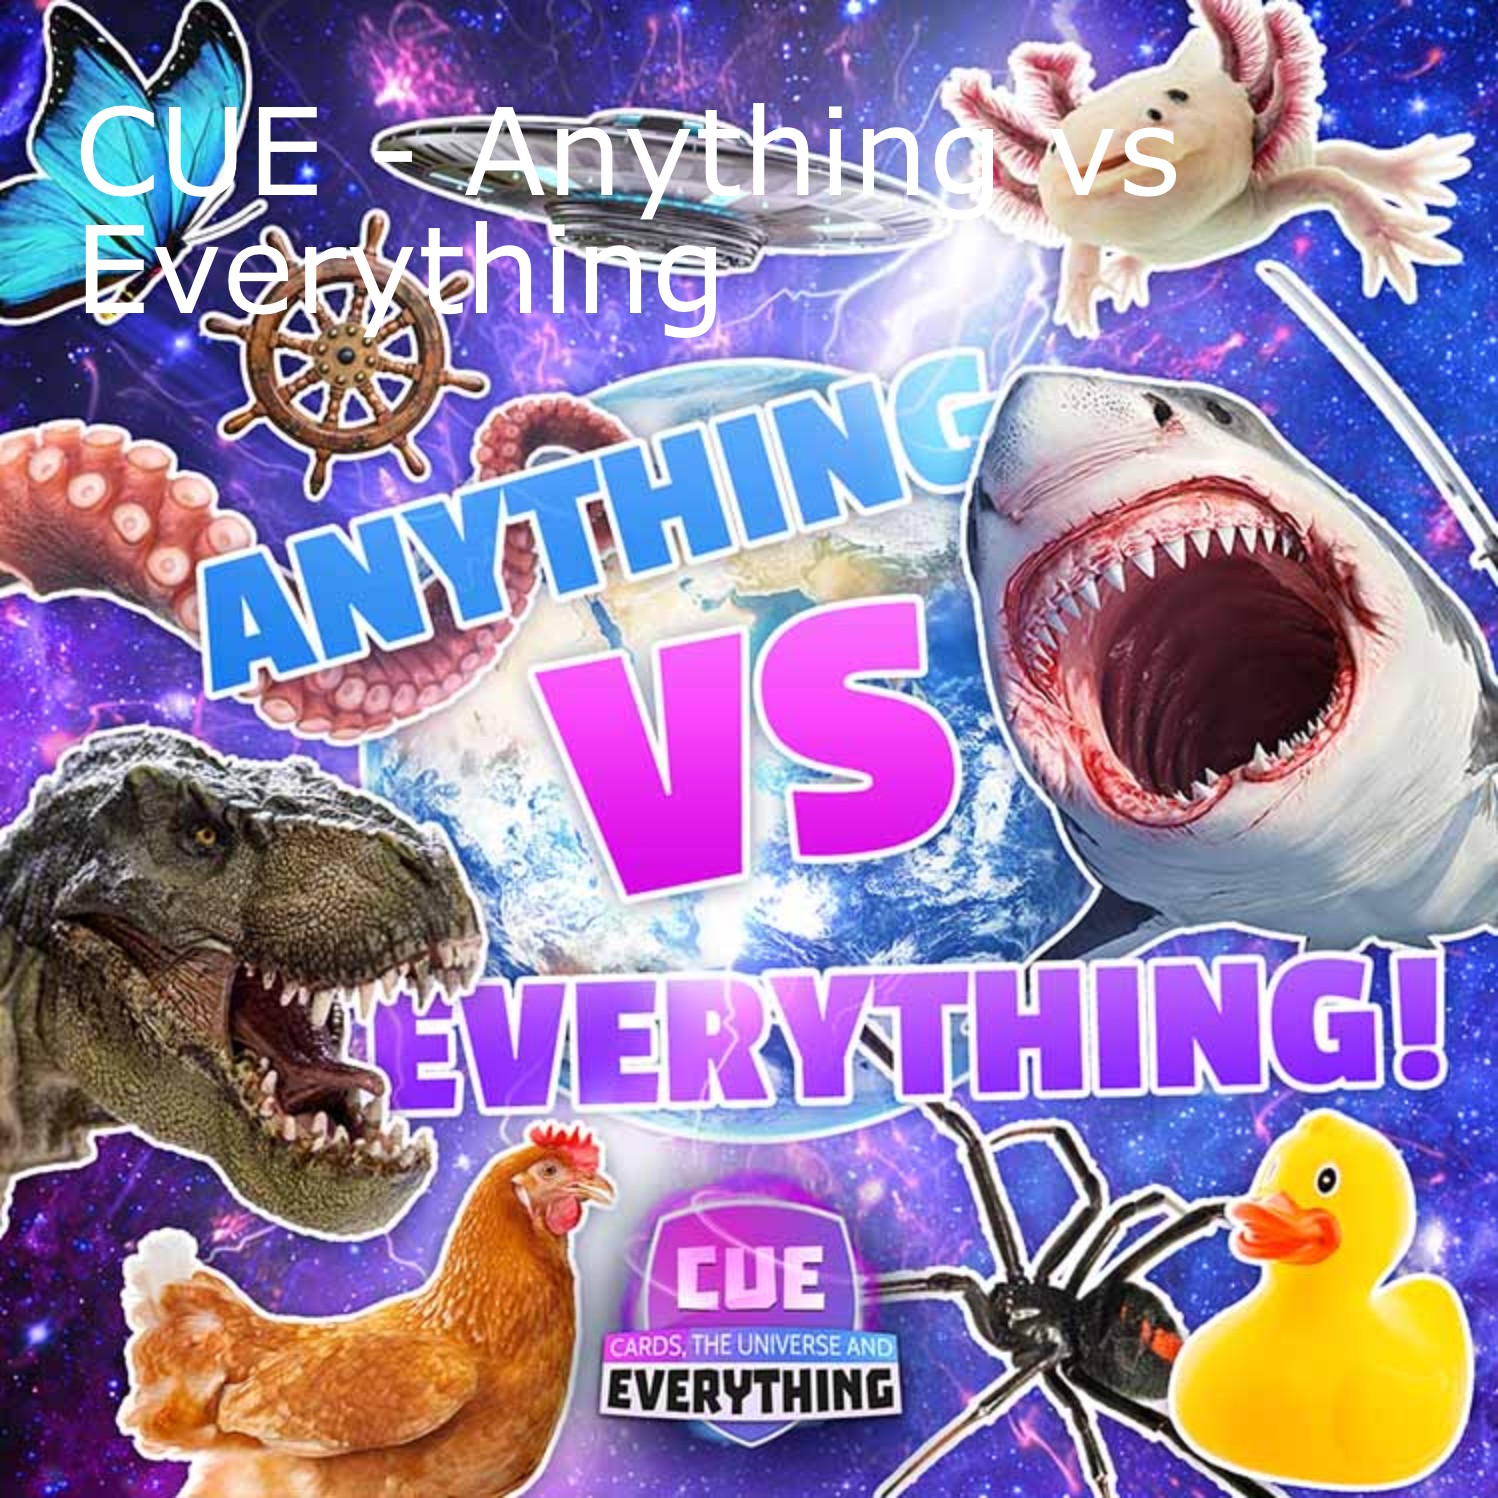 CUE - Anything vs Everything